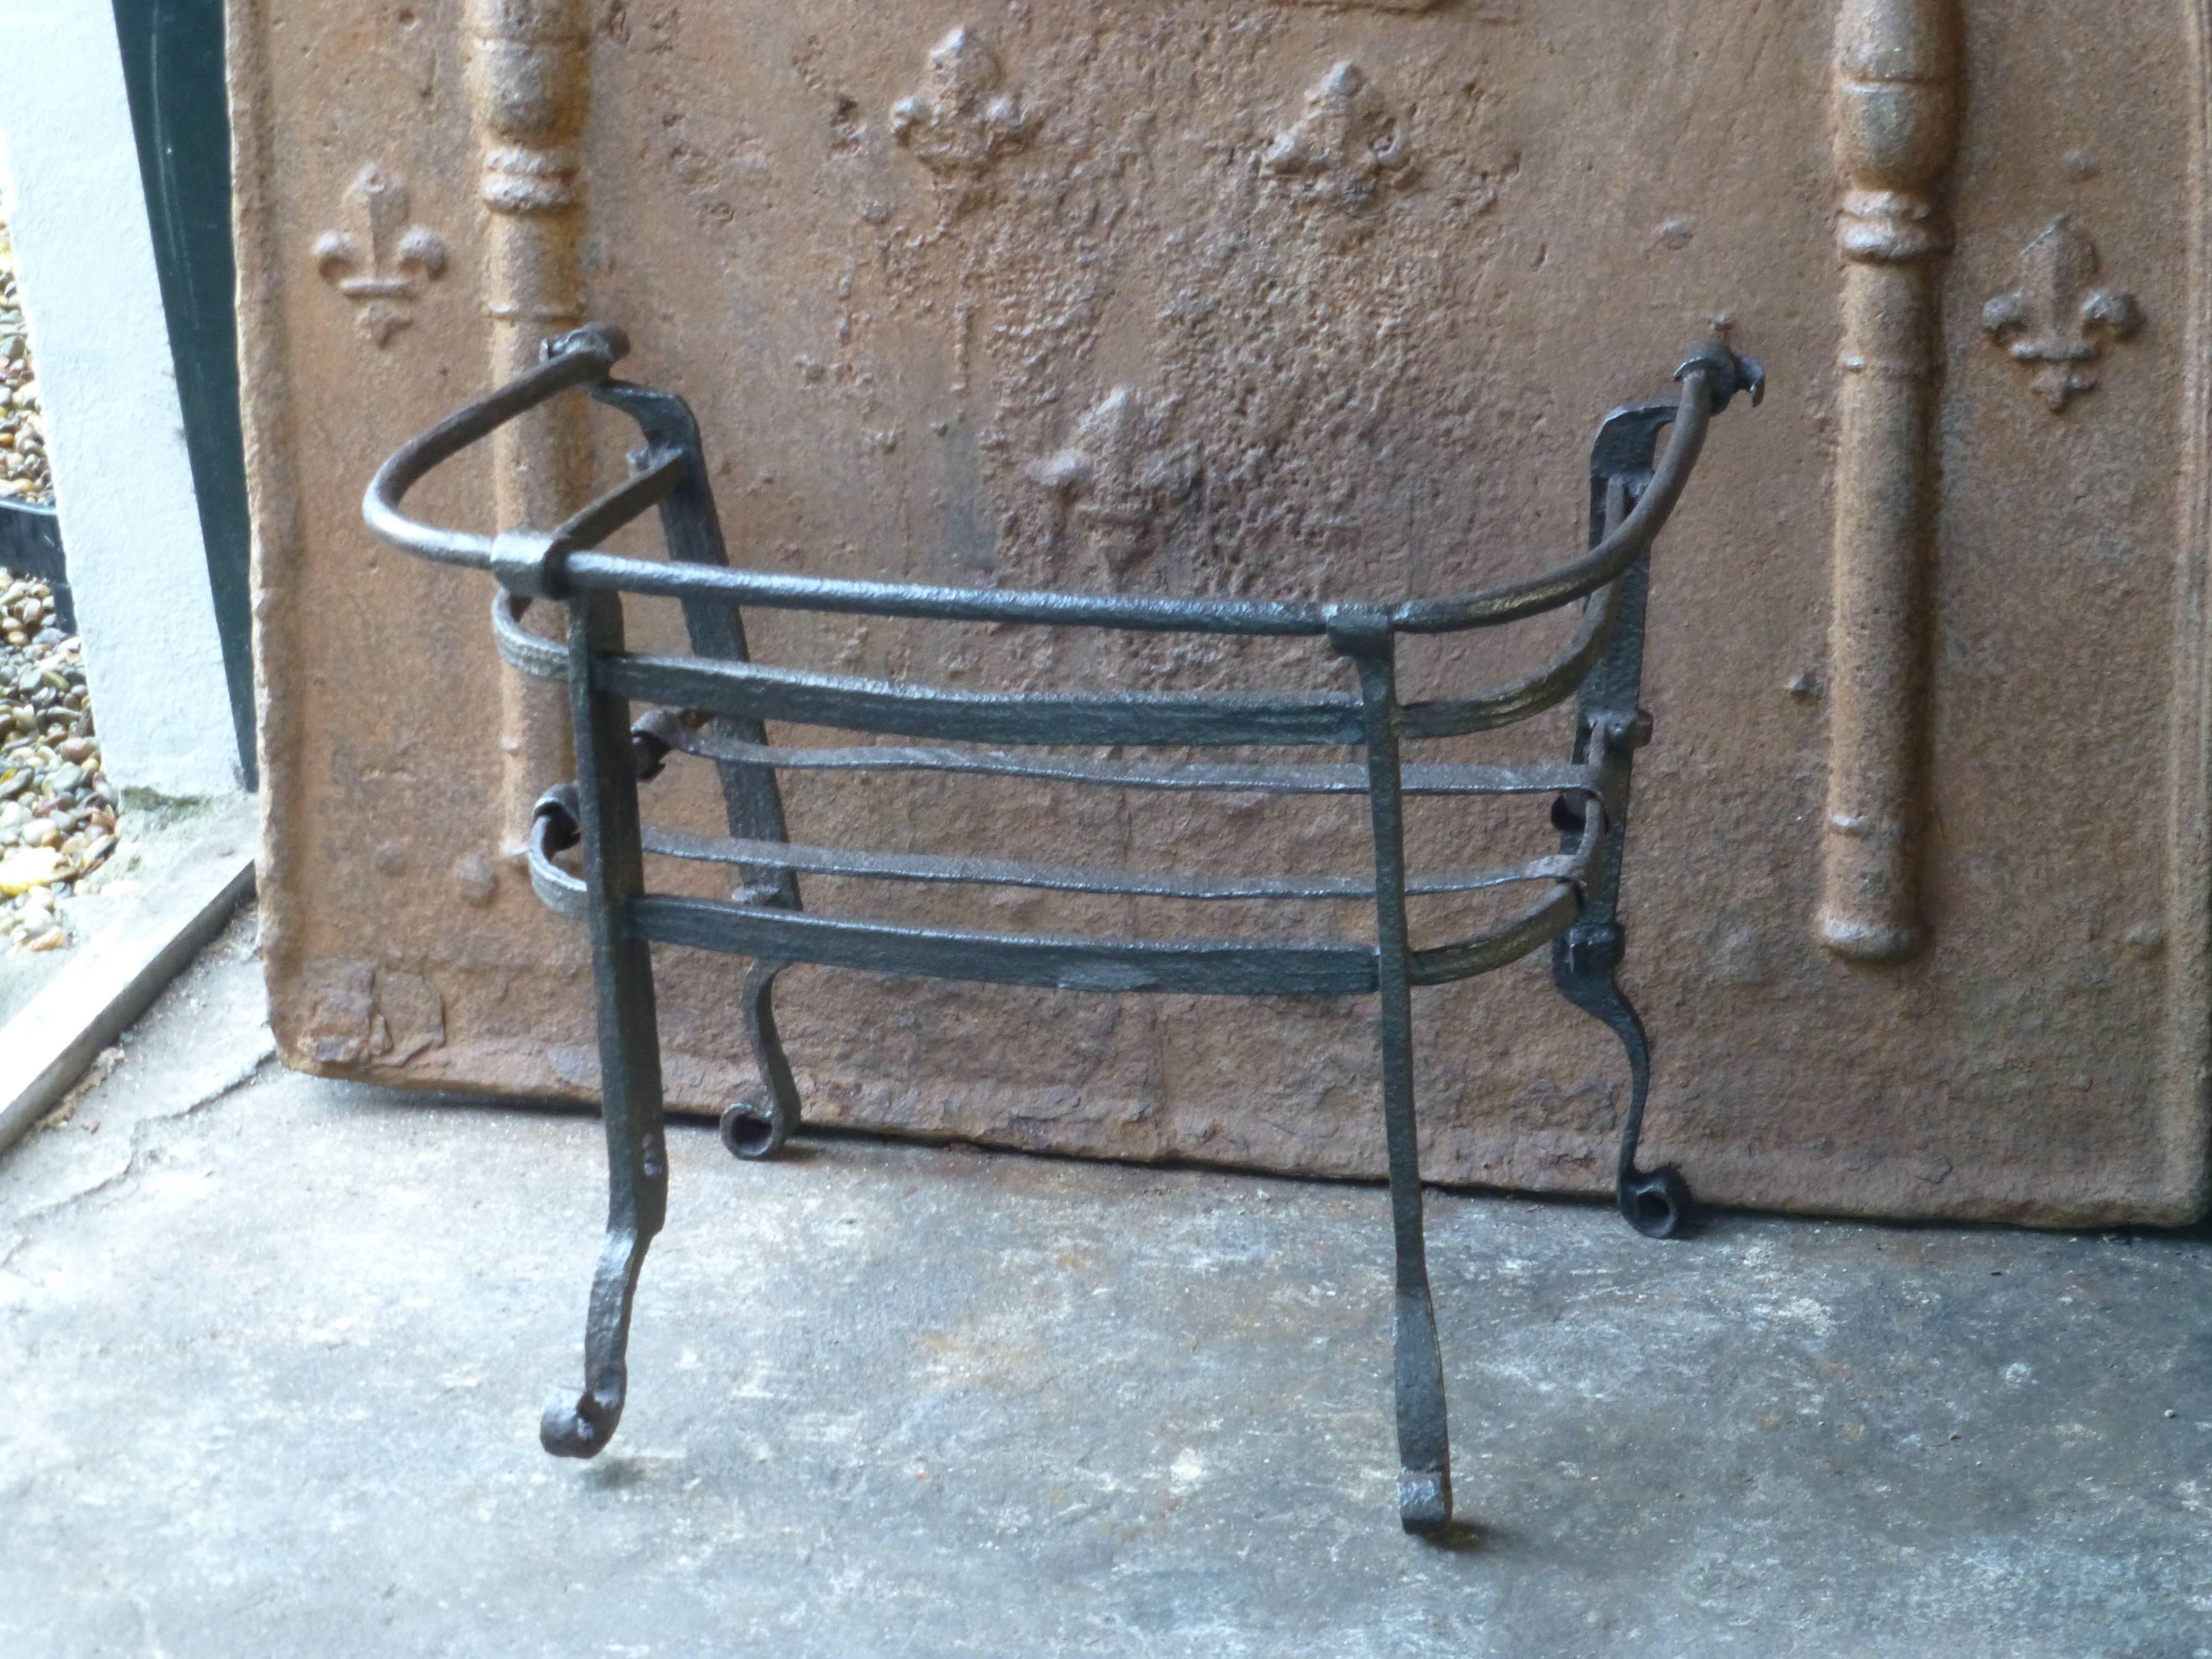 17th century English fireplace grate made of wrought iron.